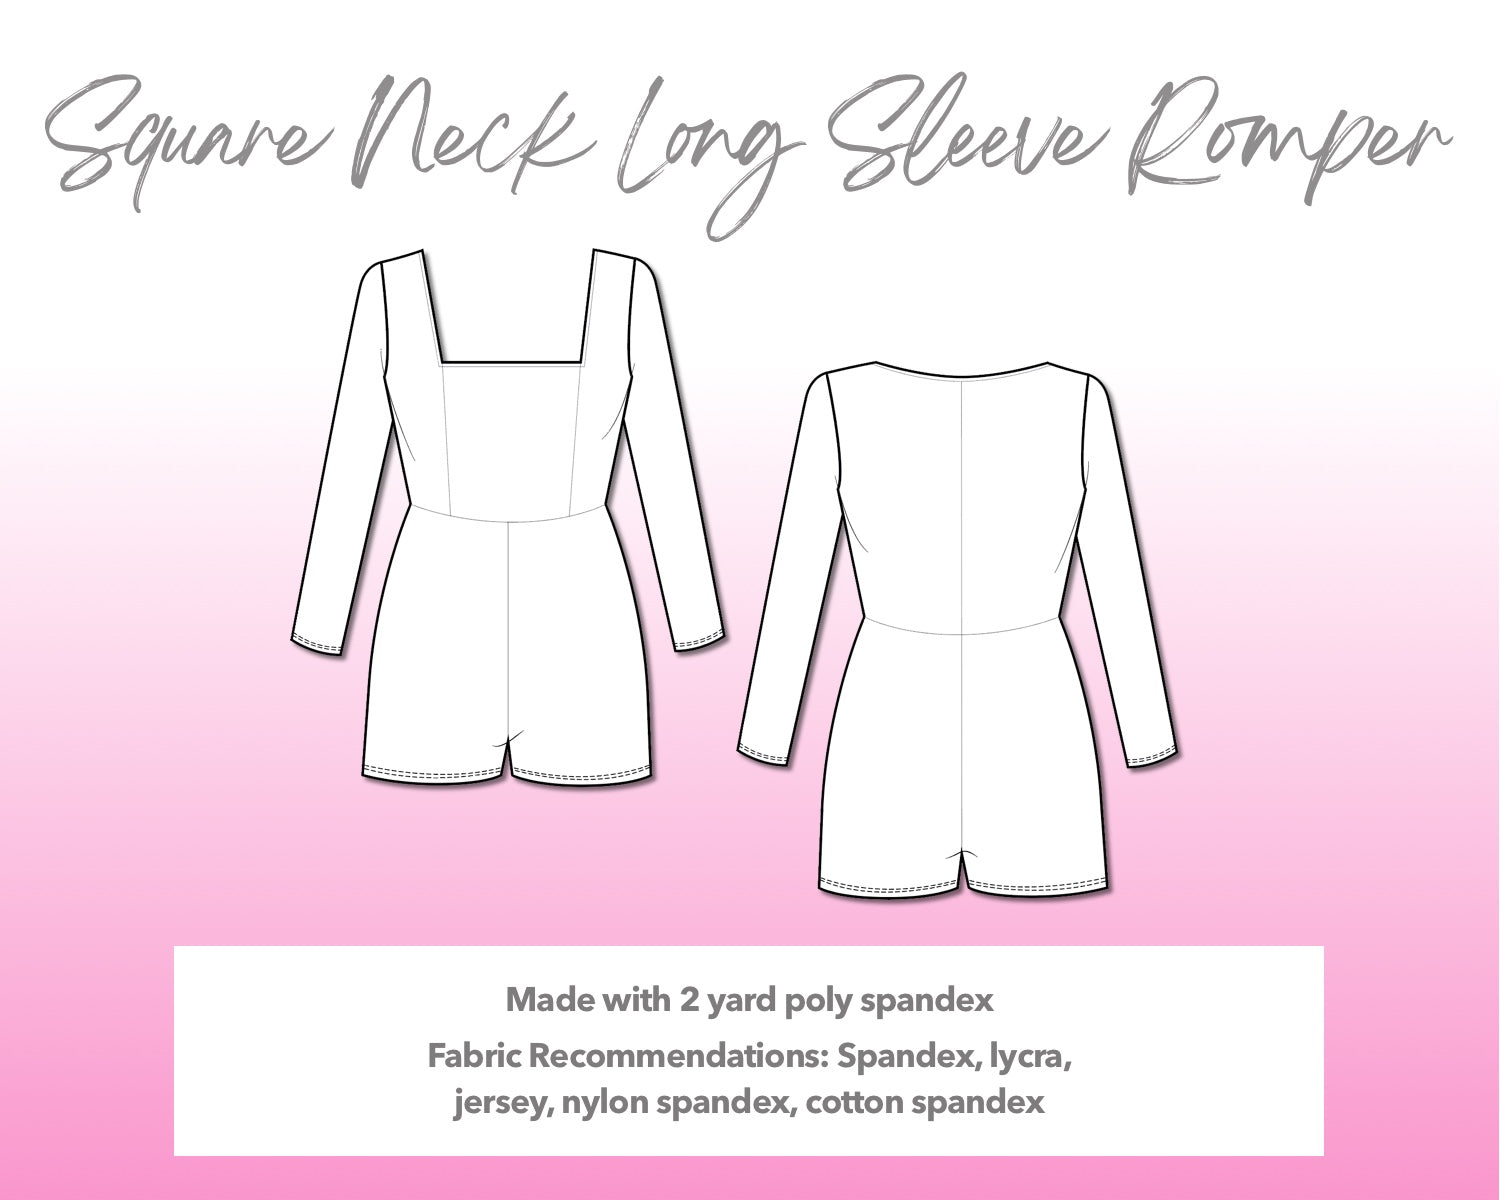 Illustration and detailed description for Square Neck Long Sleeve Romper sewing pattern.